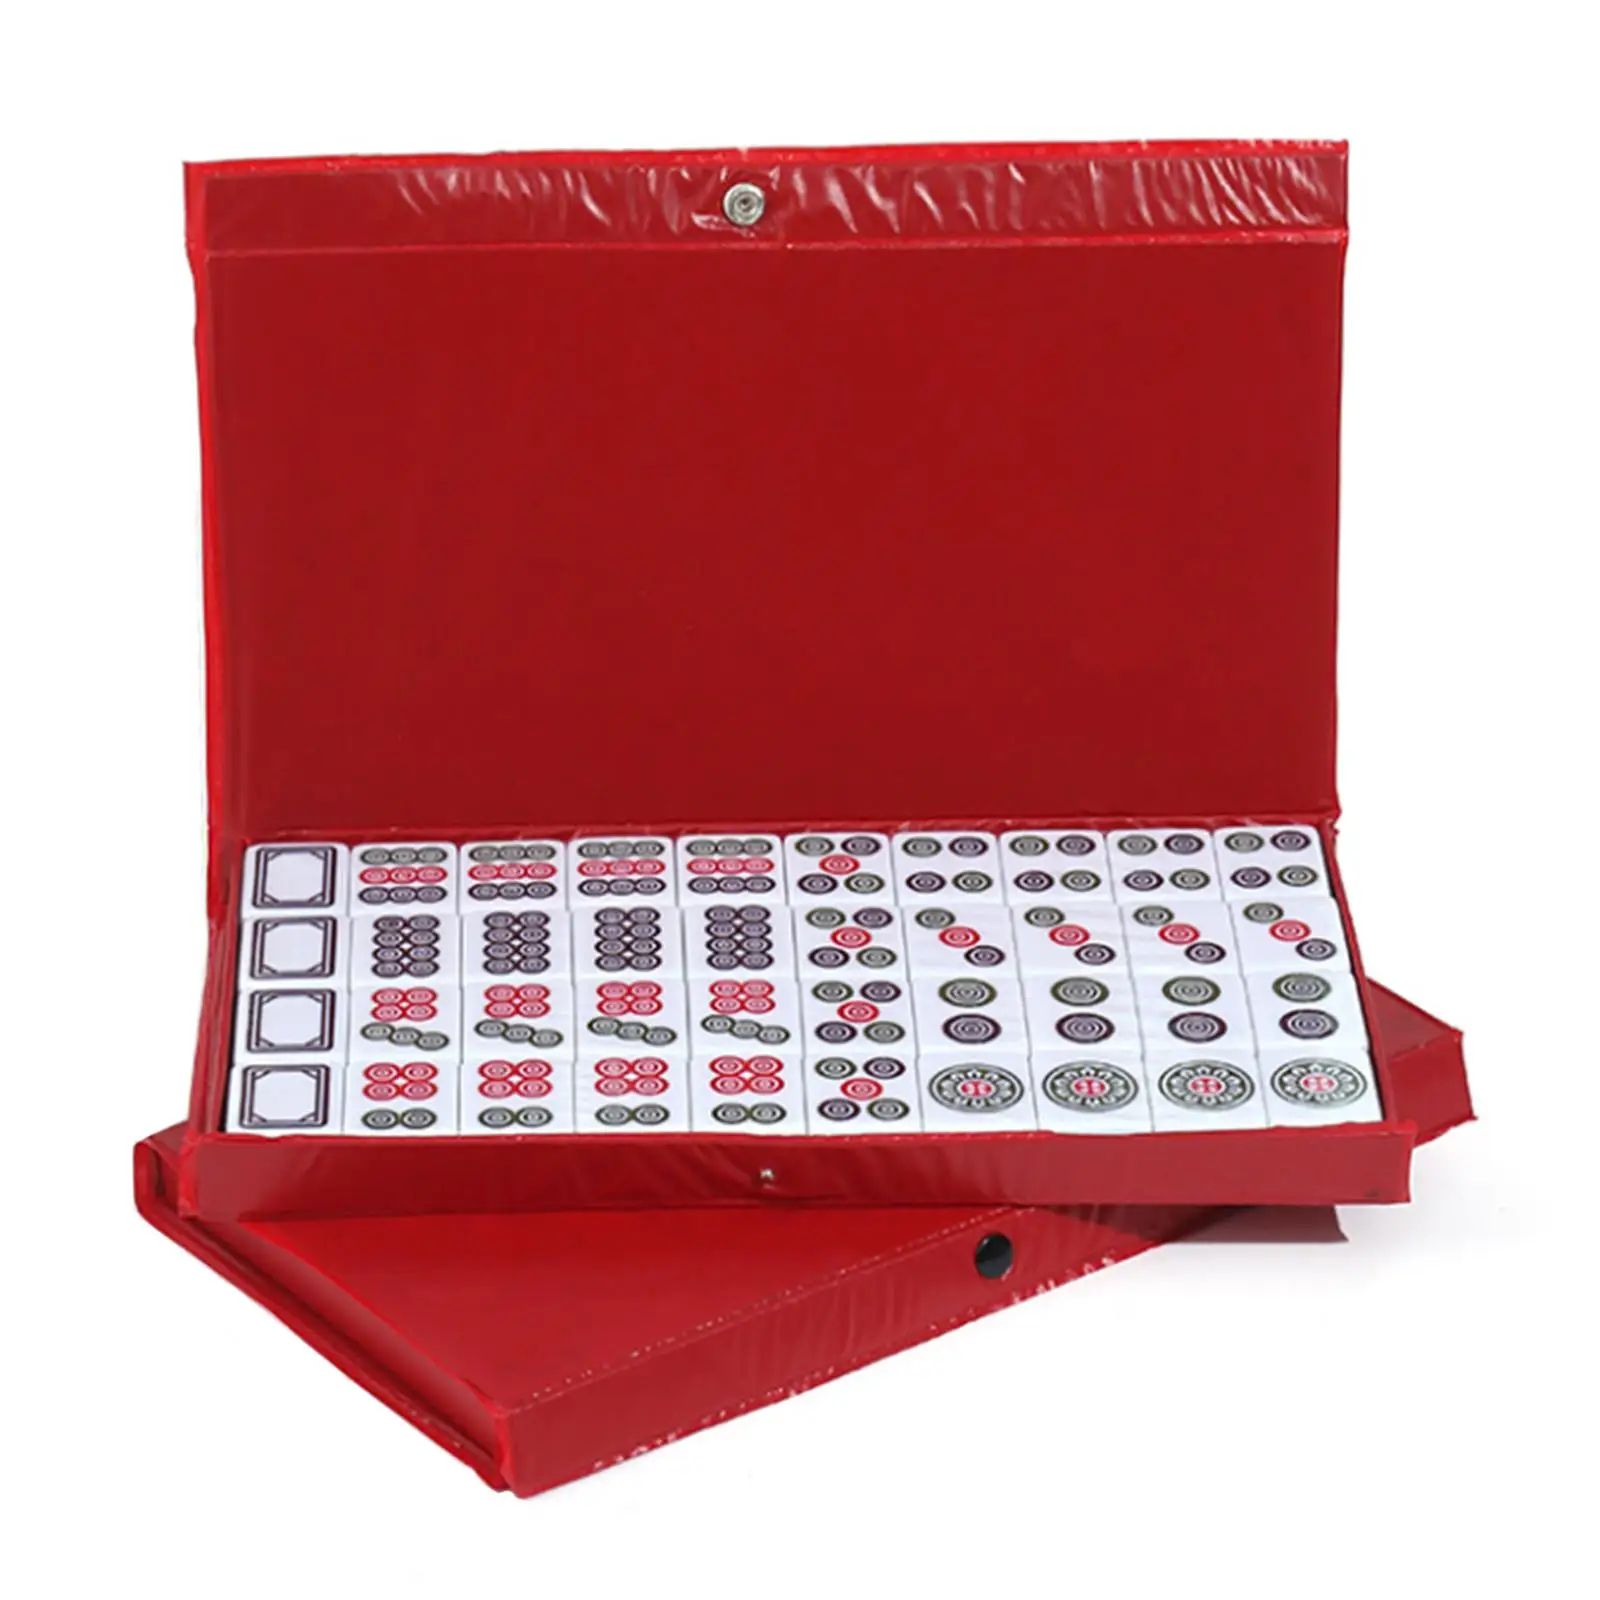 Chinese Mahjong Portable Exquisite Complete mAh Jong Set Mahjong Game Set for Leisure Game Entertainment Friends Adults Gift